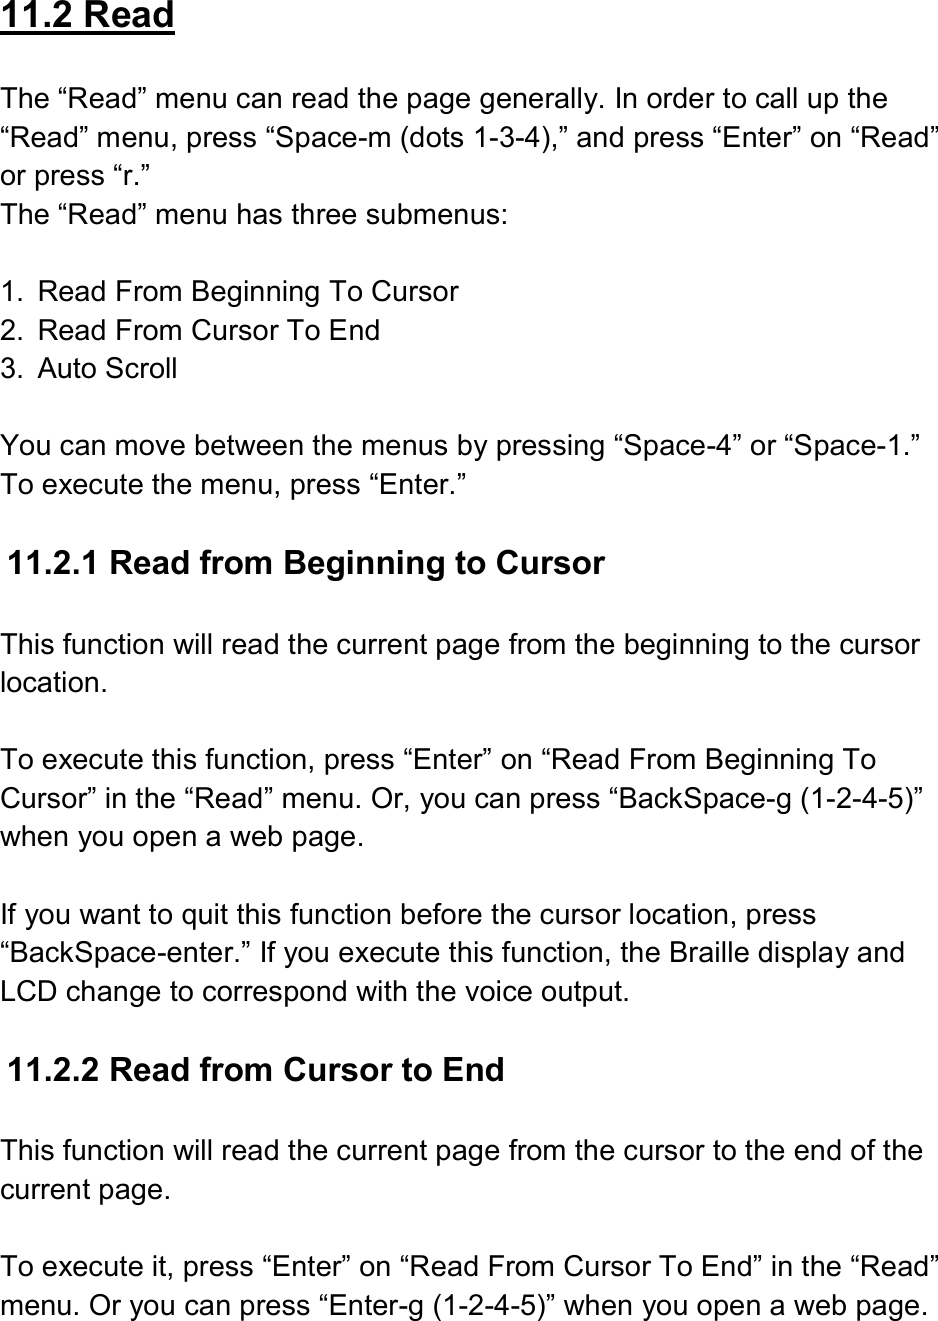  11.2 Read  The “Read” menu can read the page generally. In order to call up the “Read” menu, press “Space-m (dots 1-3-4),” and press “Enter” on “Read” or press “r.” The “Read” menu has three submenus:  1.  Read From Beginning To Cursor 2.  Read From Cursor To End 3.  Auto Scroll  You can move between the menus by pressing “Space-4” or “Space-1.” To execute the menu, press “Enter.”  11.2.1 Read from Beginning to Cursor  This function will read the current page from the beginning to the cursor location.    To execute this function, press “Enter” on “Read From Beginning To Cursor” in the “Read” menu. Or, you can press “BackSpace-g (1-2-4-5)” when you open a web page.    If you want to quit this function before the cursor location, press “BackSpace-enter.” If you execute this function, the Braille display and LCD change to correspond with the voice output.  11.2.2 Read from Cursor to End  This function will read the current page from the cursor to the end of the current page.  To execute it, press “Enter” on “Read From Cursor To End” in the “Read” menu. Or you can press “Enter-g (1-2-4-5)” when you open a web page.  